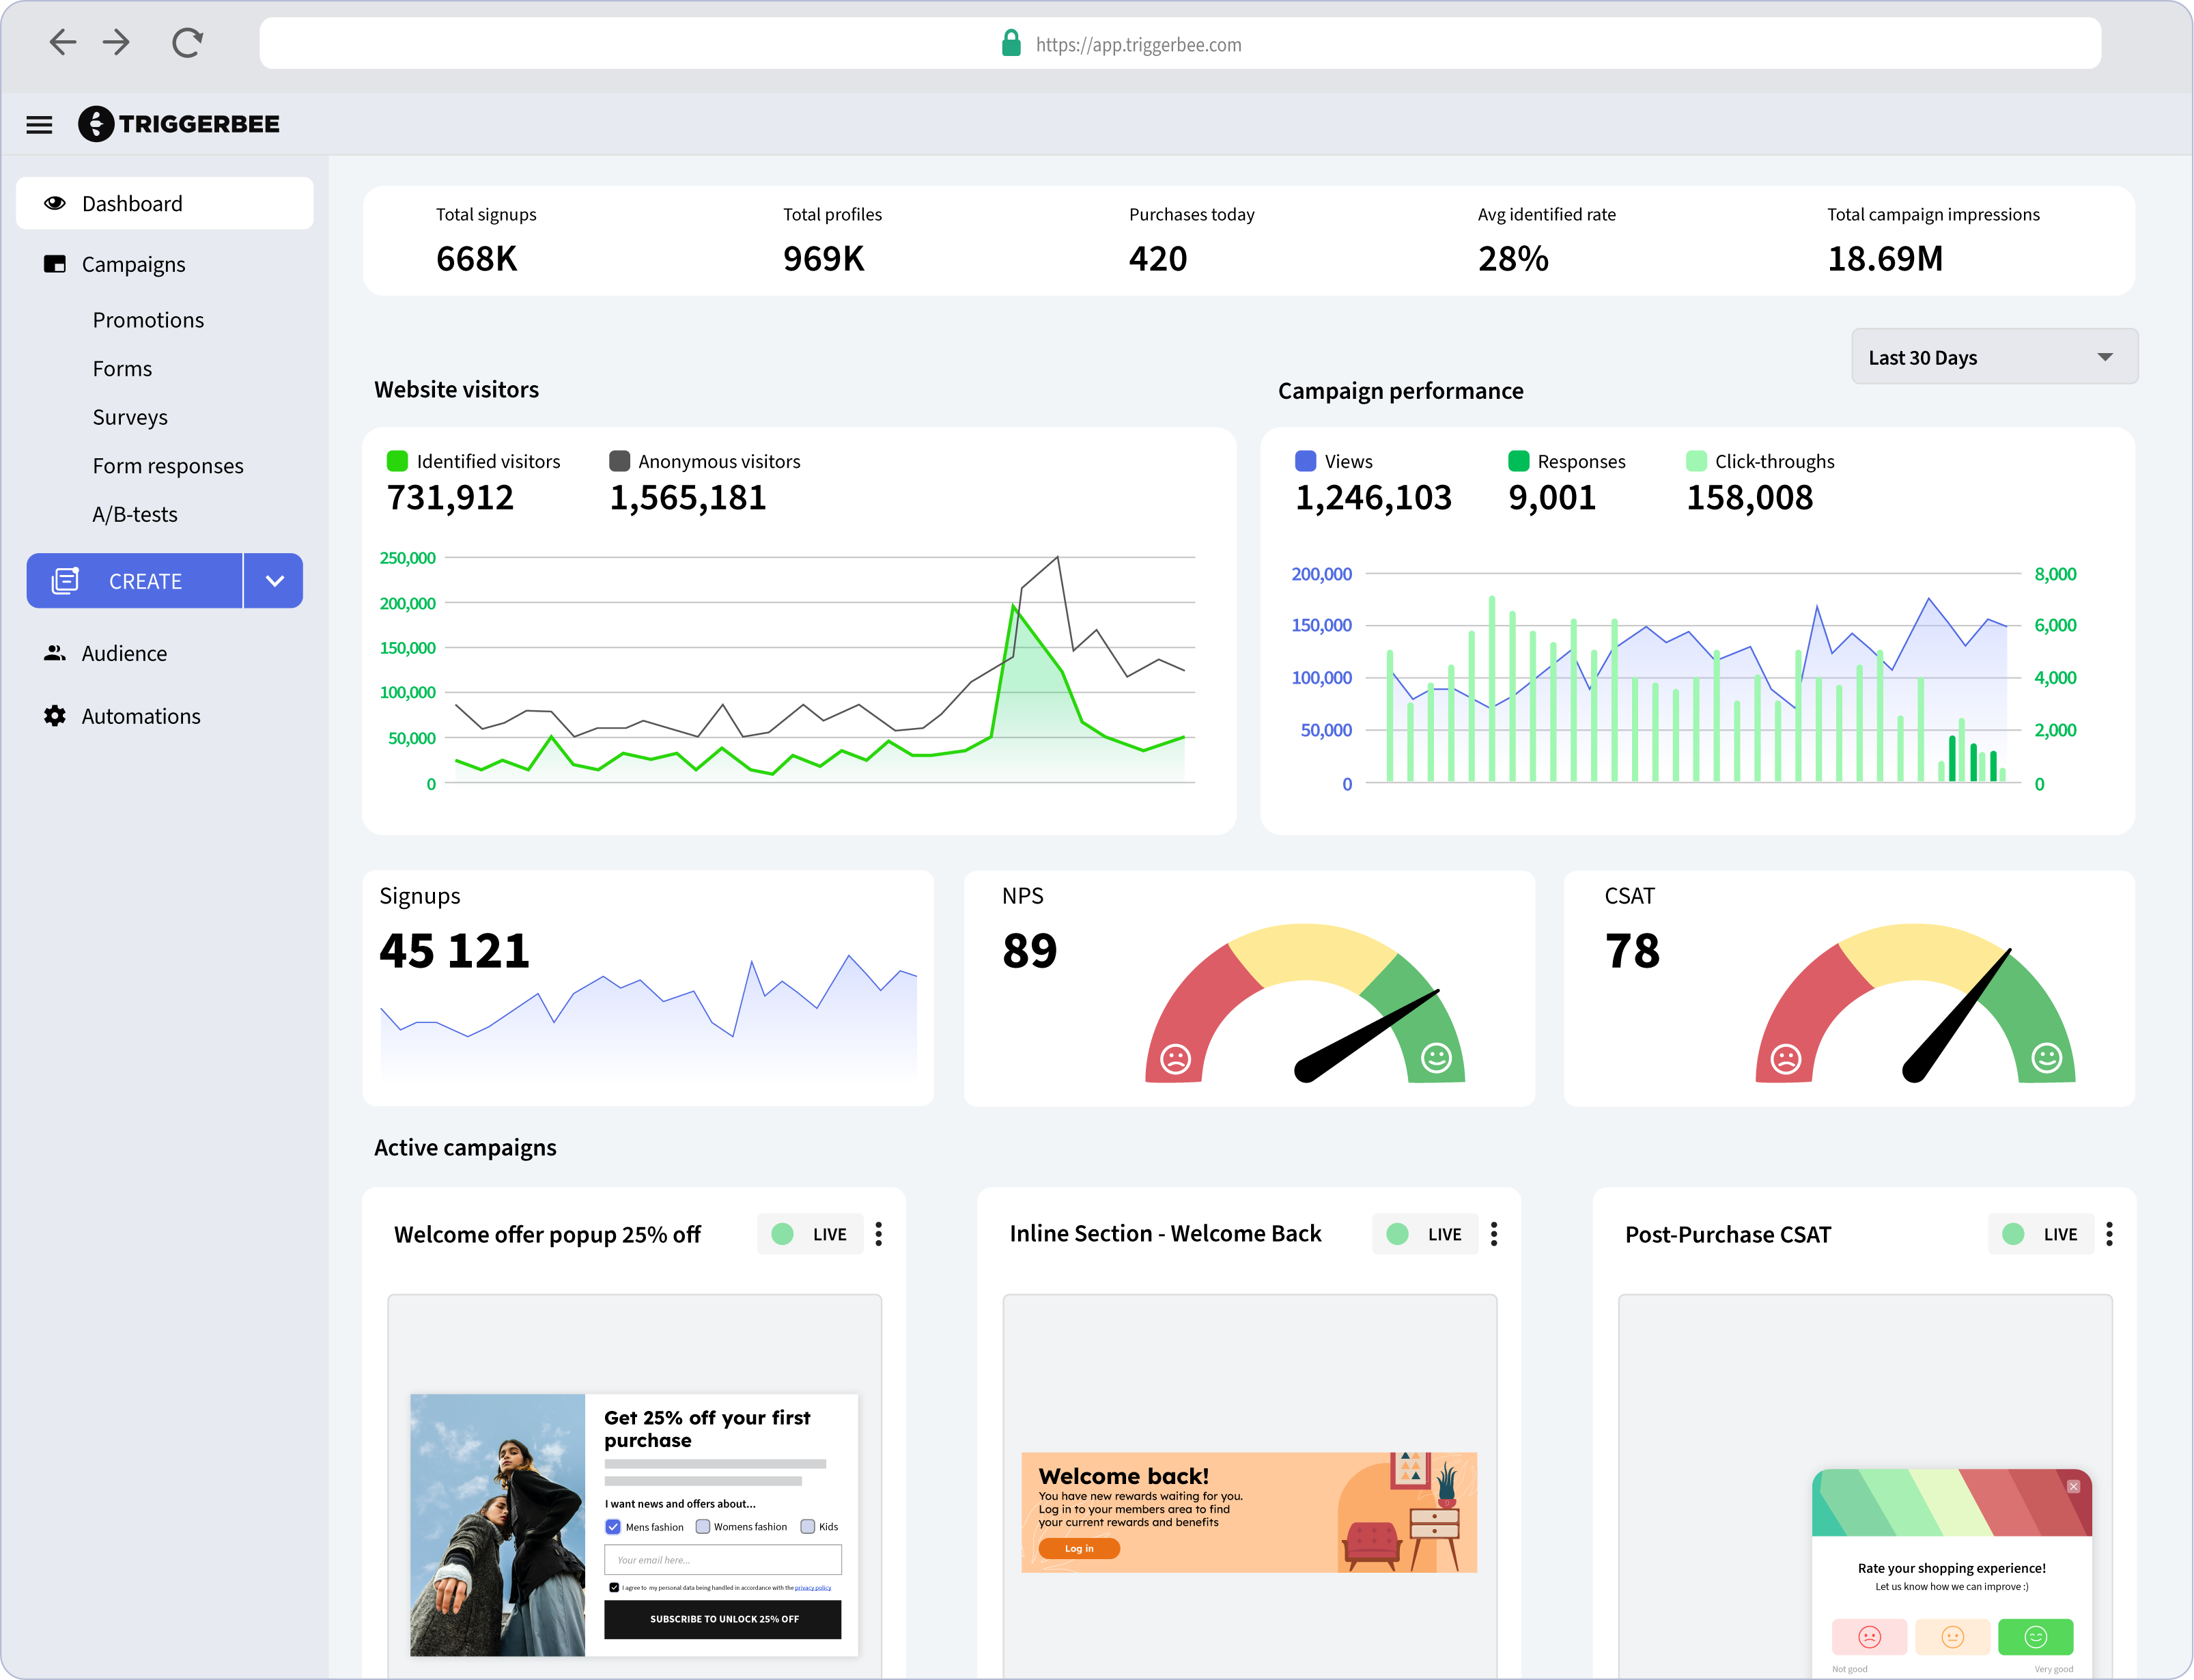 Triggerbee's dashboard gives you a great overview of your most important statistics and figures. Get insight into how your campaigns are performing, if your NPS and CSAT are rising or falling, how many signups you had in the last 30 days, and keep track o